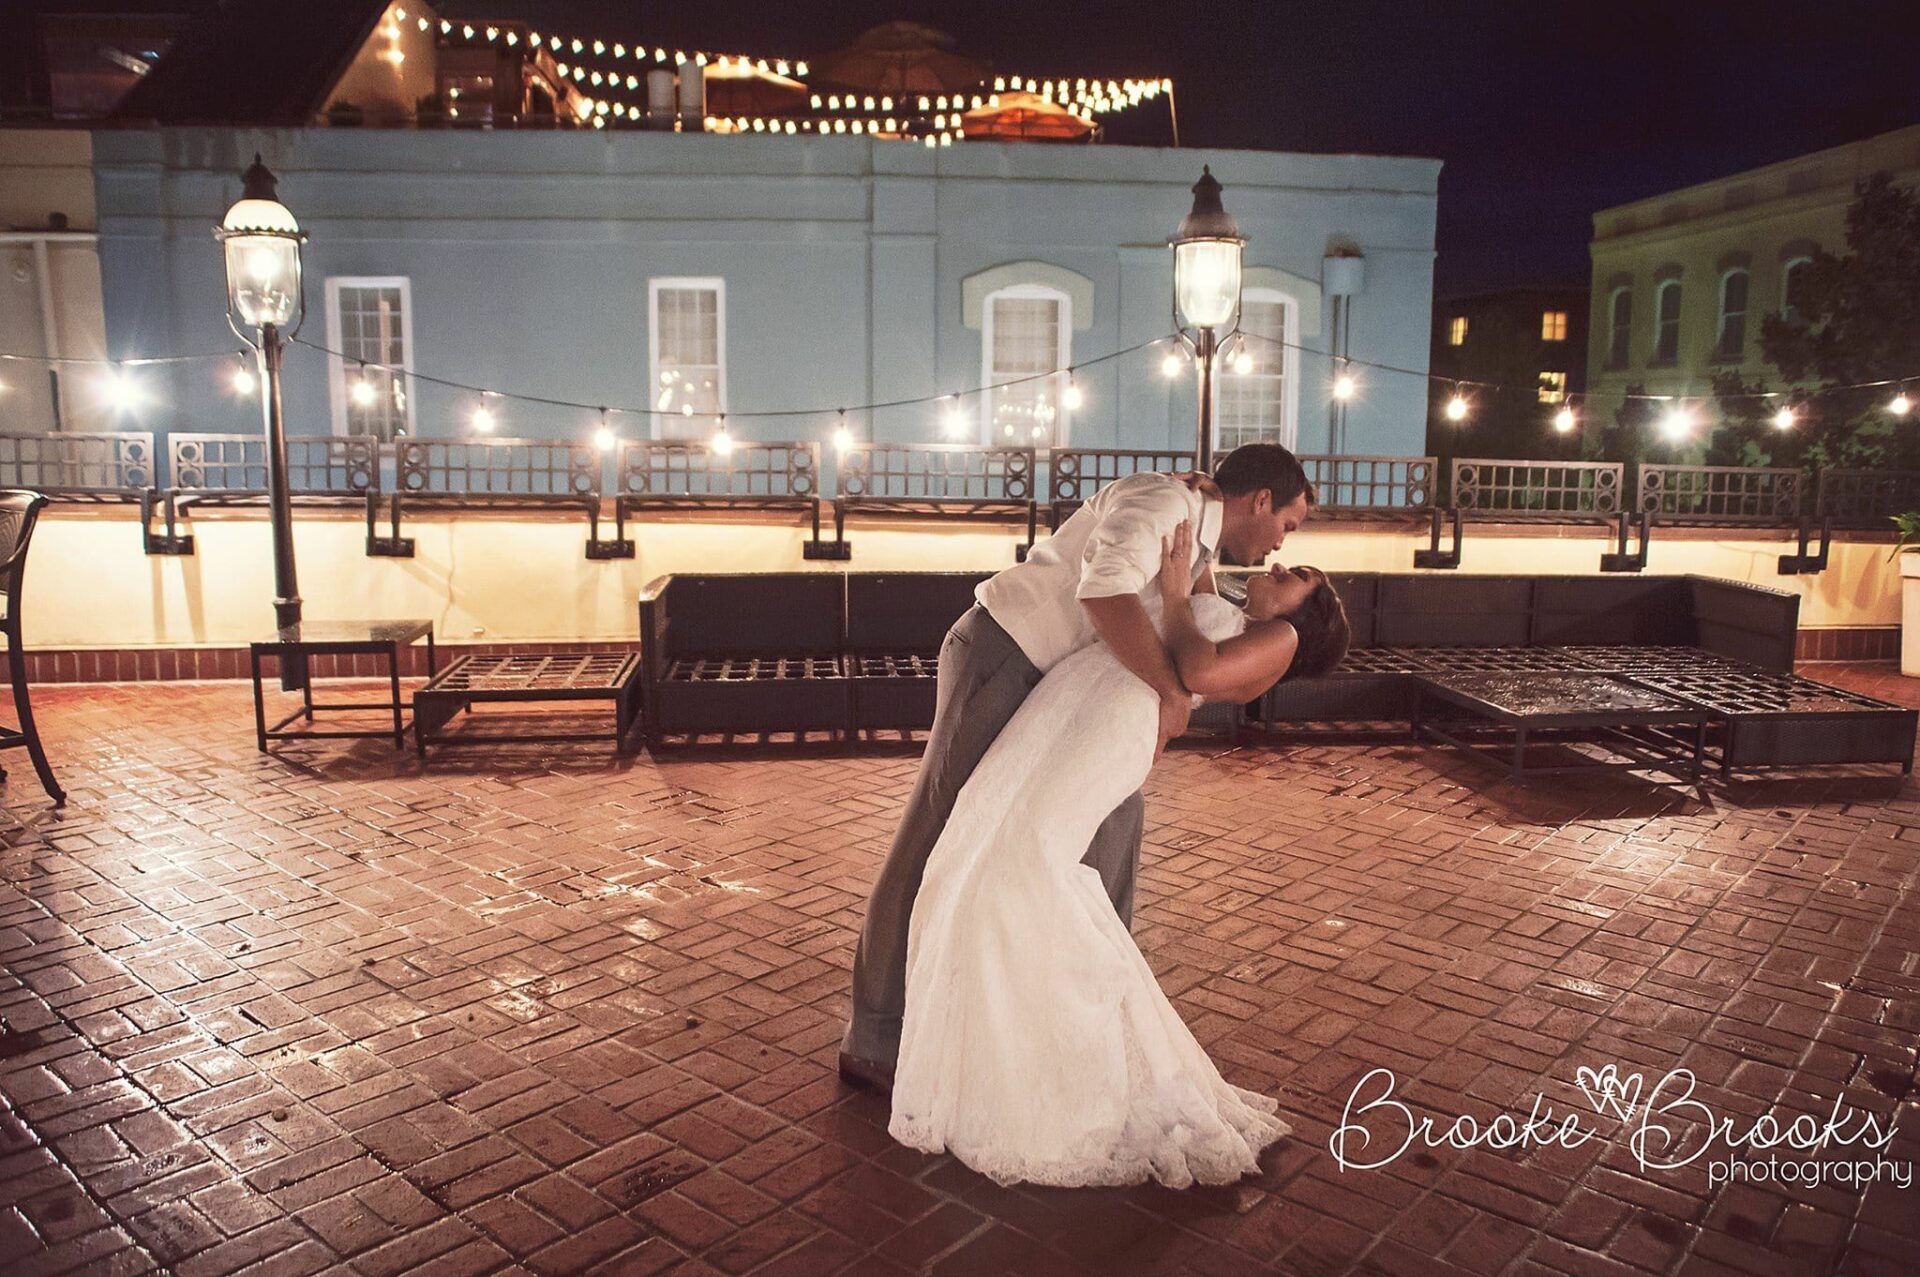 A bride and groom sharing an intimate kiss on a brick patio at night during their Charleston wedding.